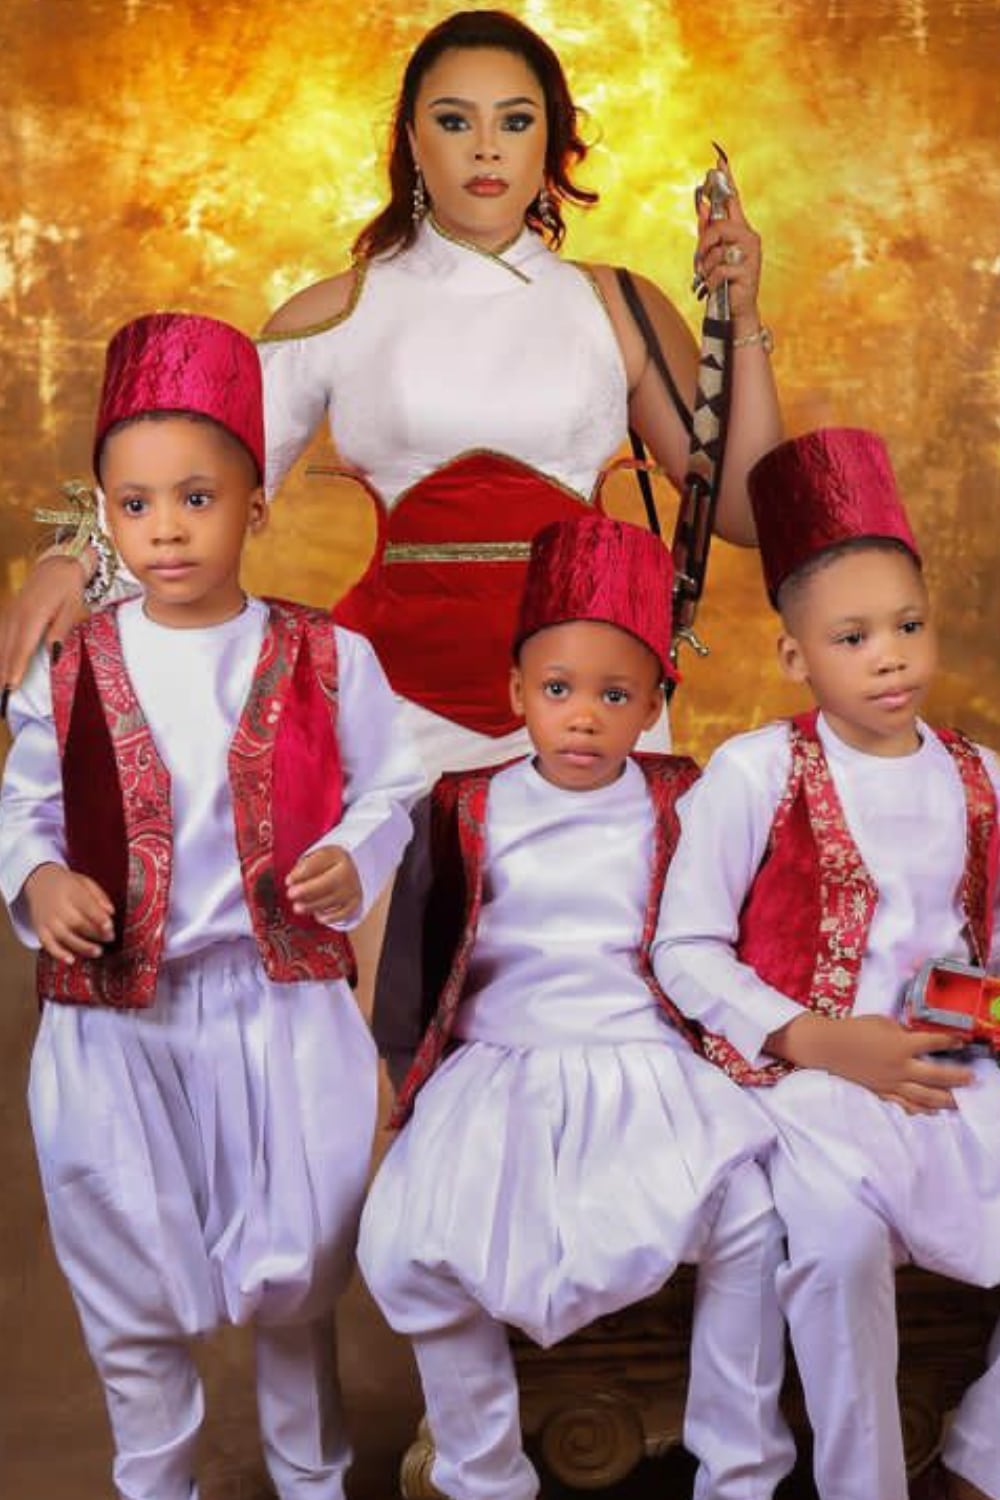 "I will fight for you all my life” - Precious Chikwendu pens emotional note to her triplets as they mark birthday